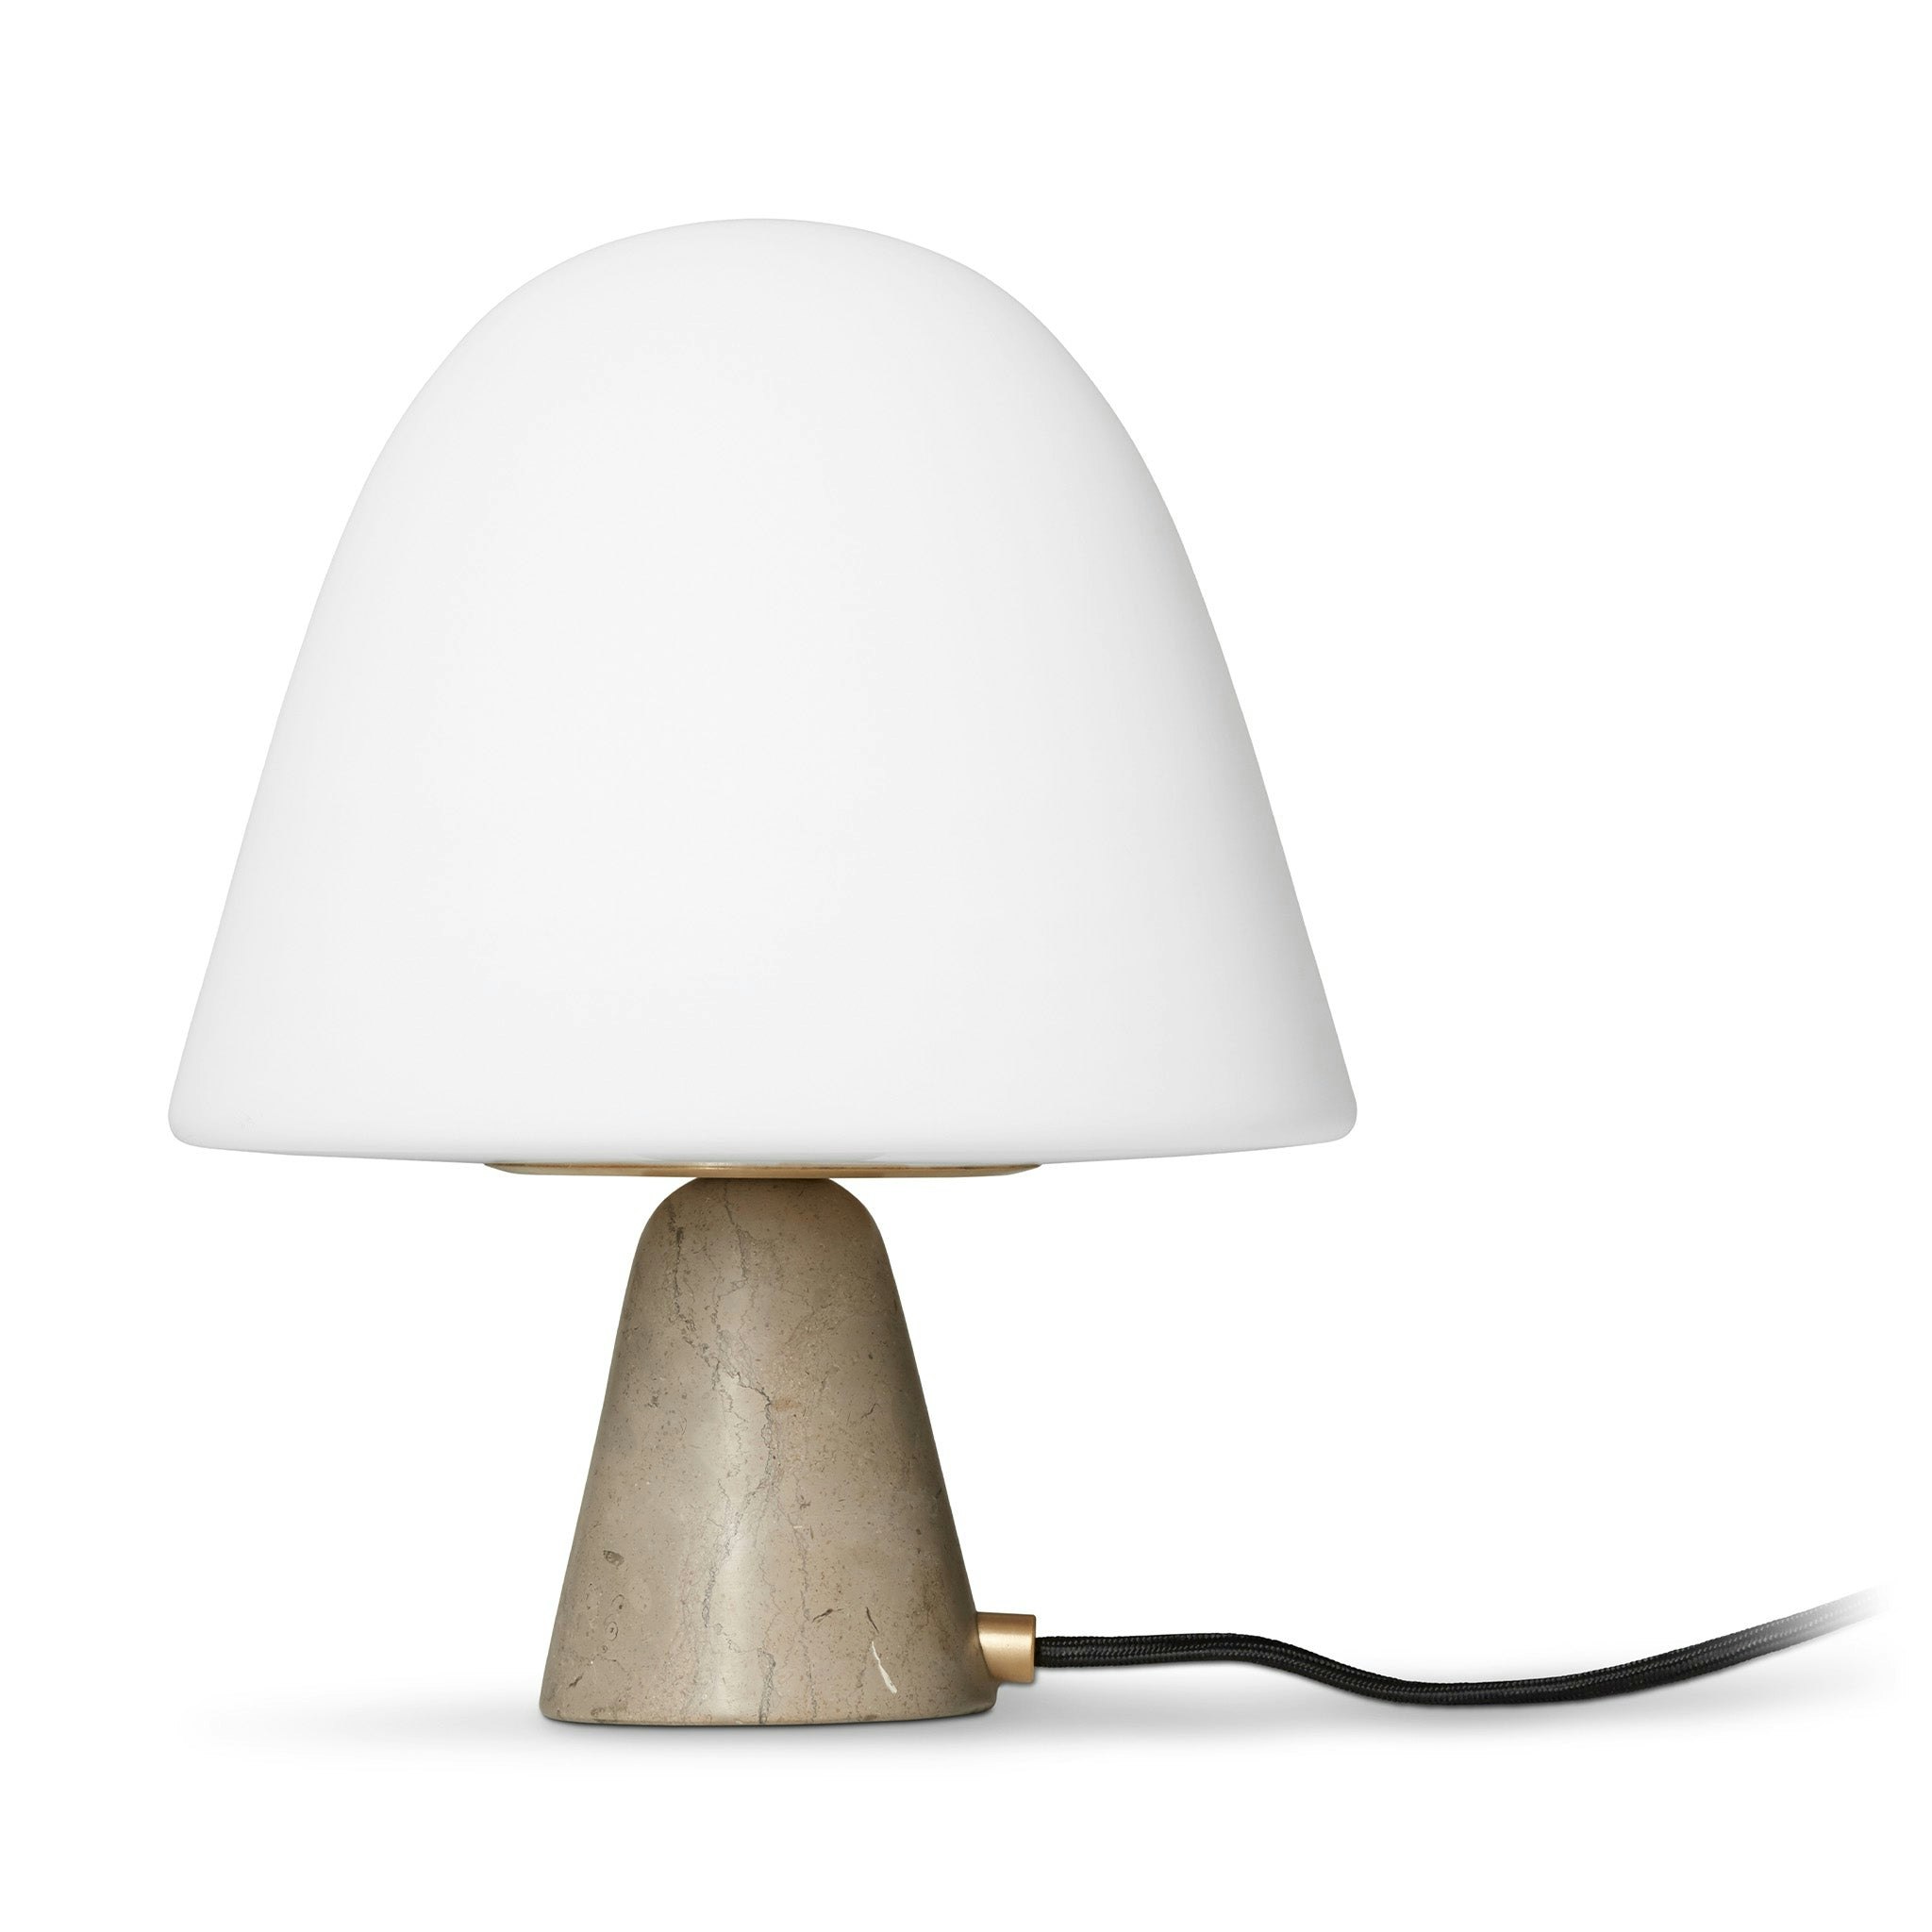 Meadow Table Lamp by Space Copenhagen for Fredericia